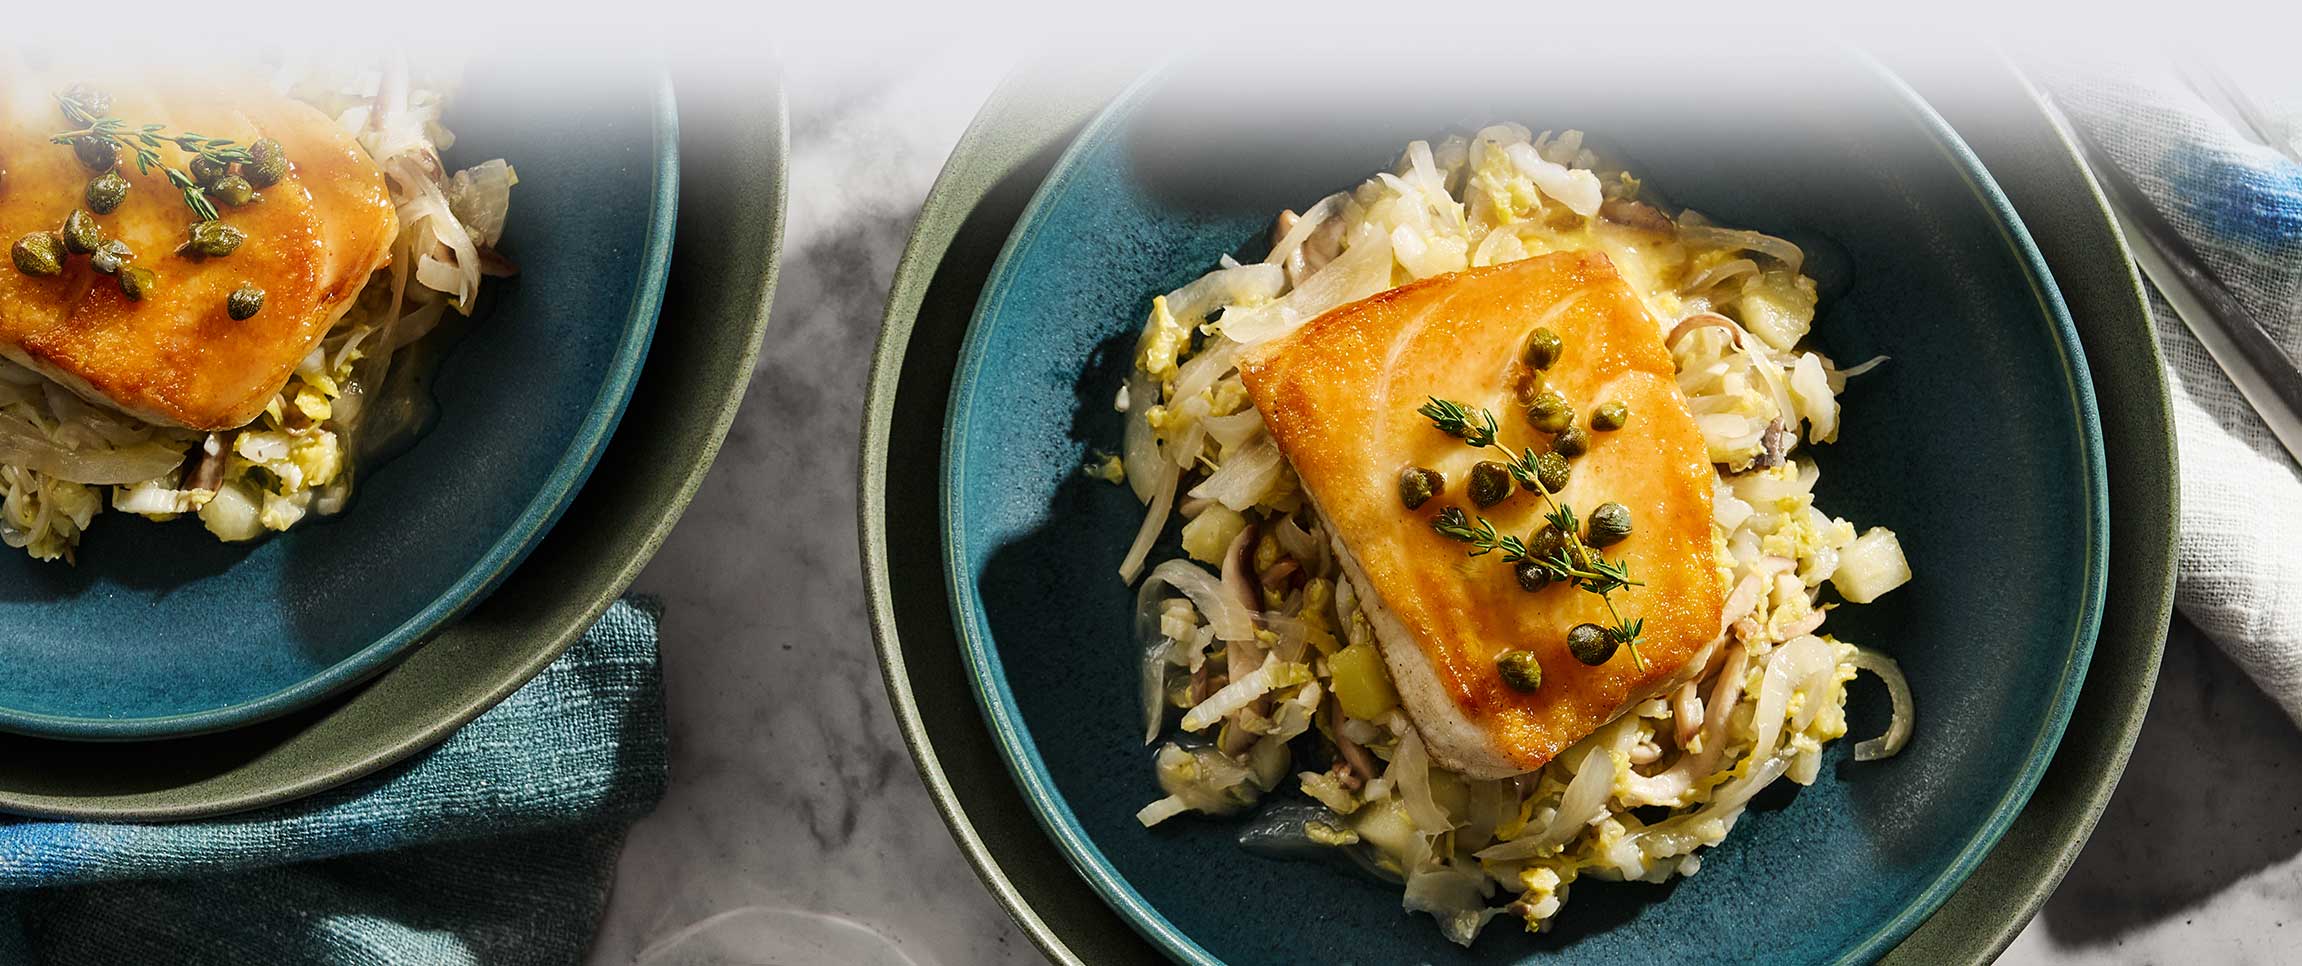 Bay Winds® Pan Seared Chilean Sea Bass with cabbage and mushrooms slaw